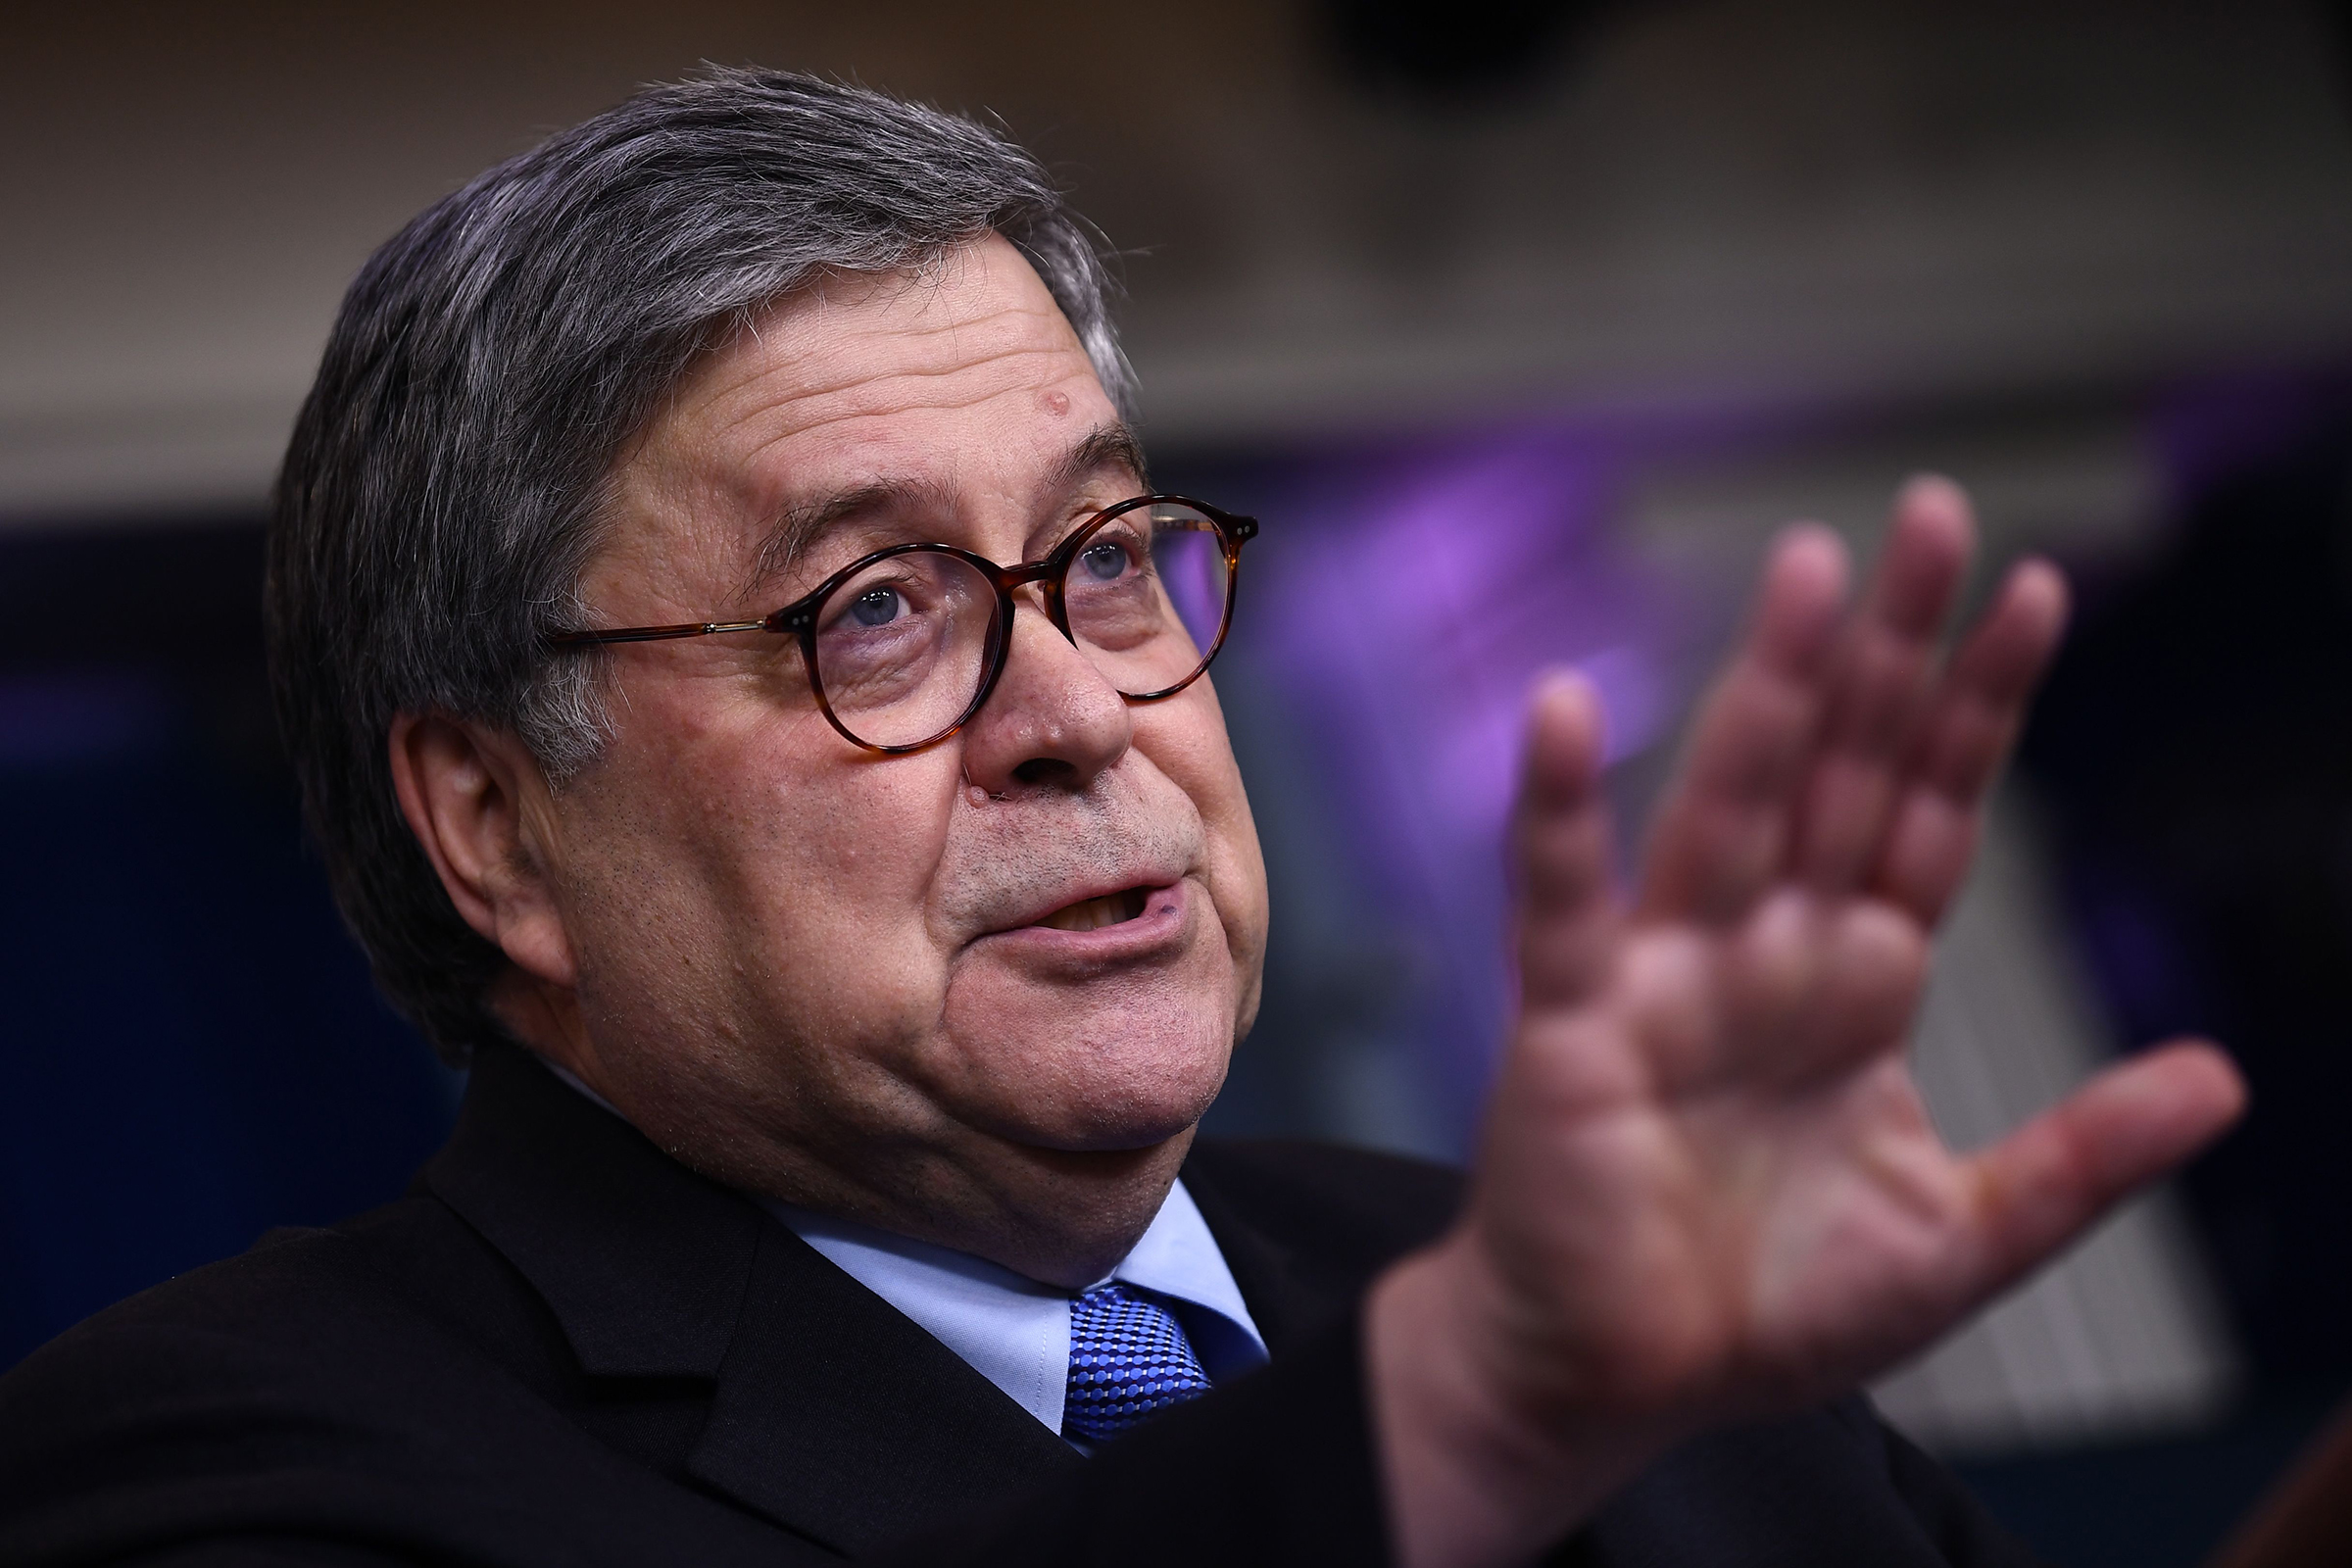 US Attorney General William Barr gestures as he speaks during a daily briefing at the White House in Washington D.C. on March 23, 2020. (Brendan Smialowski—AFP via Getty Images)